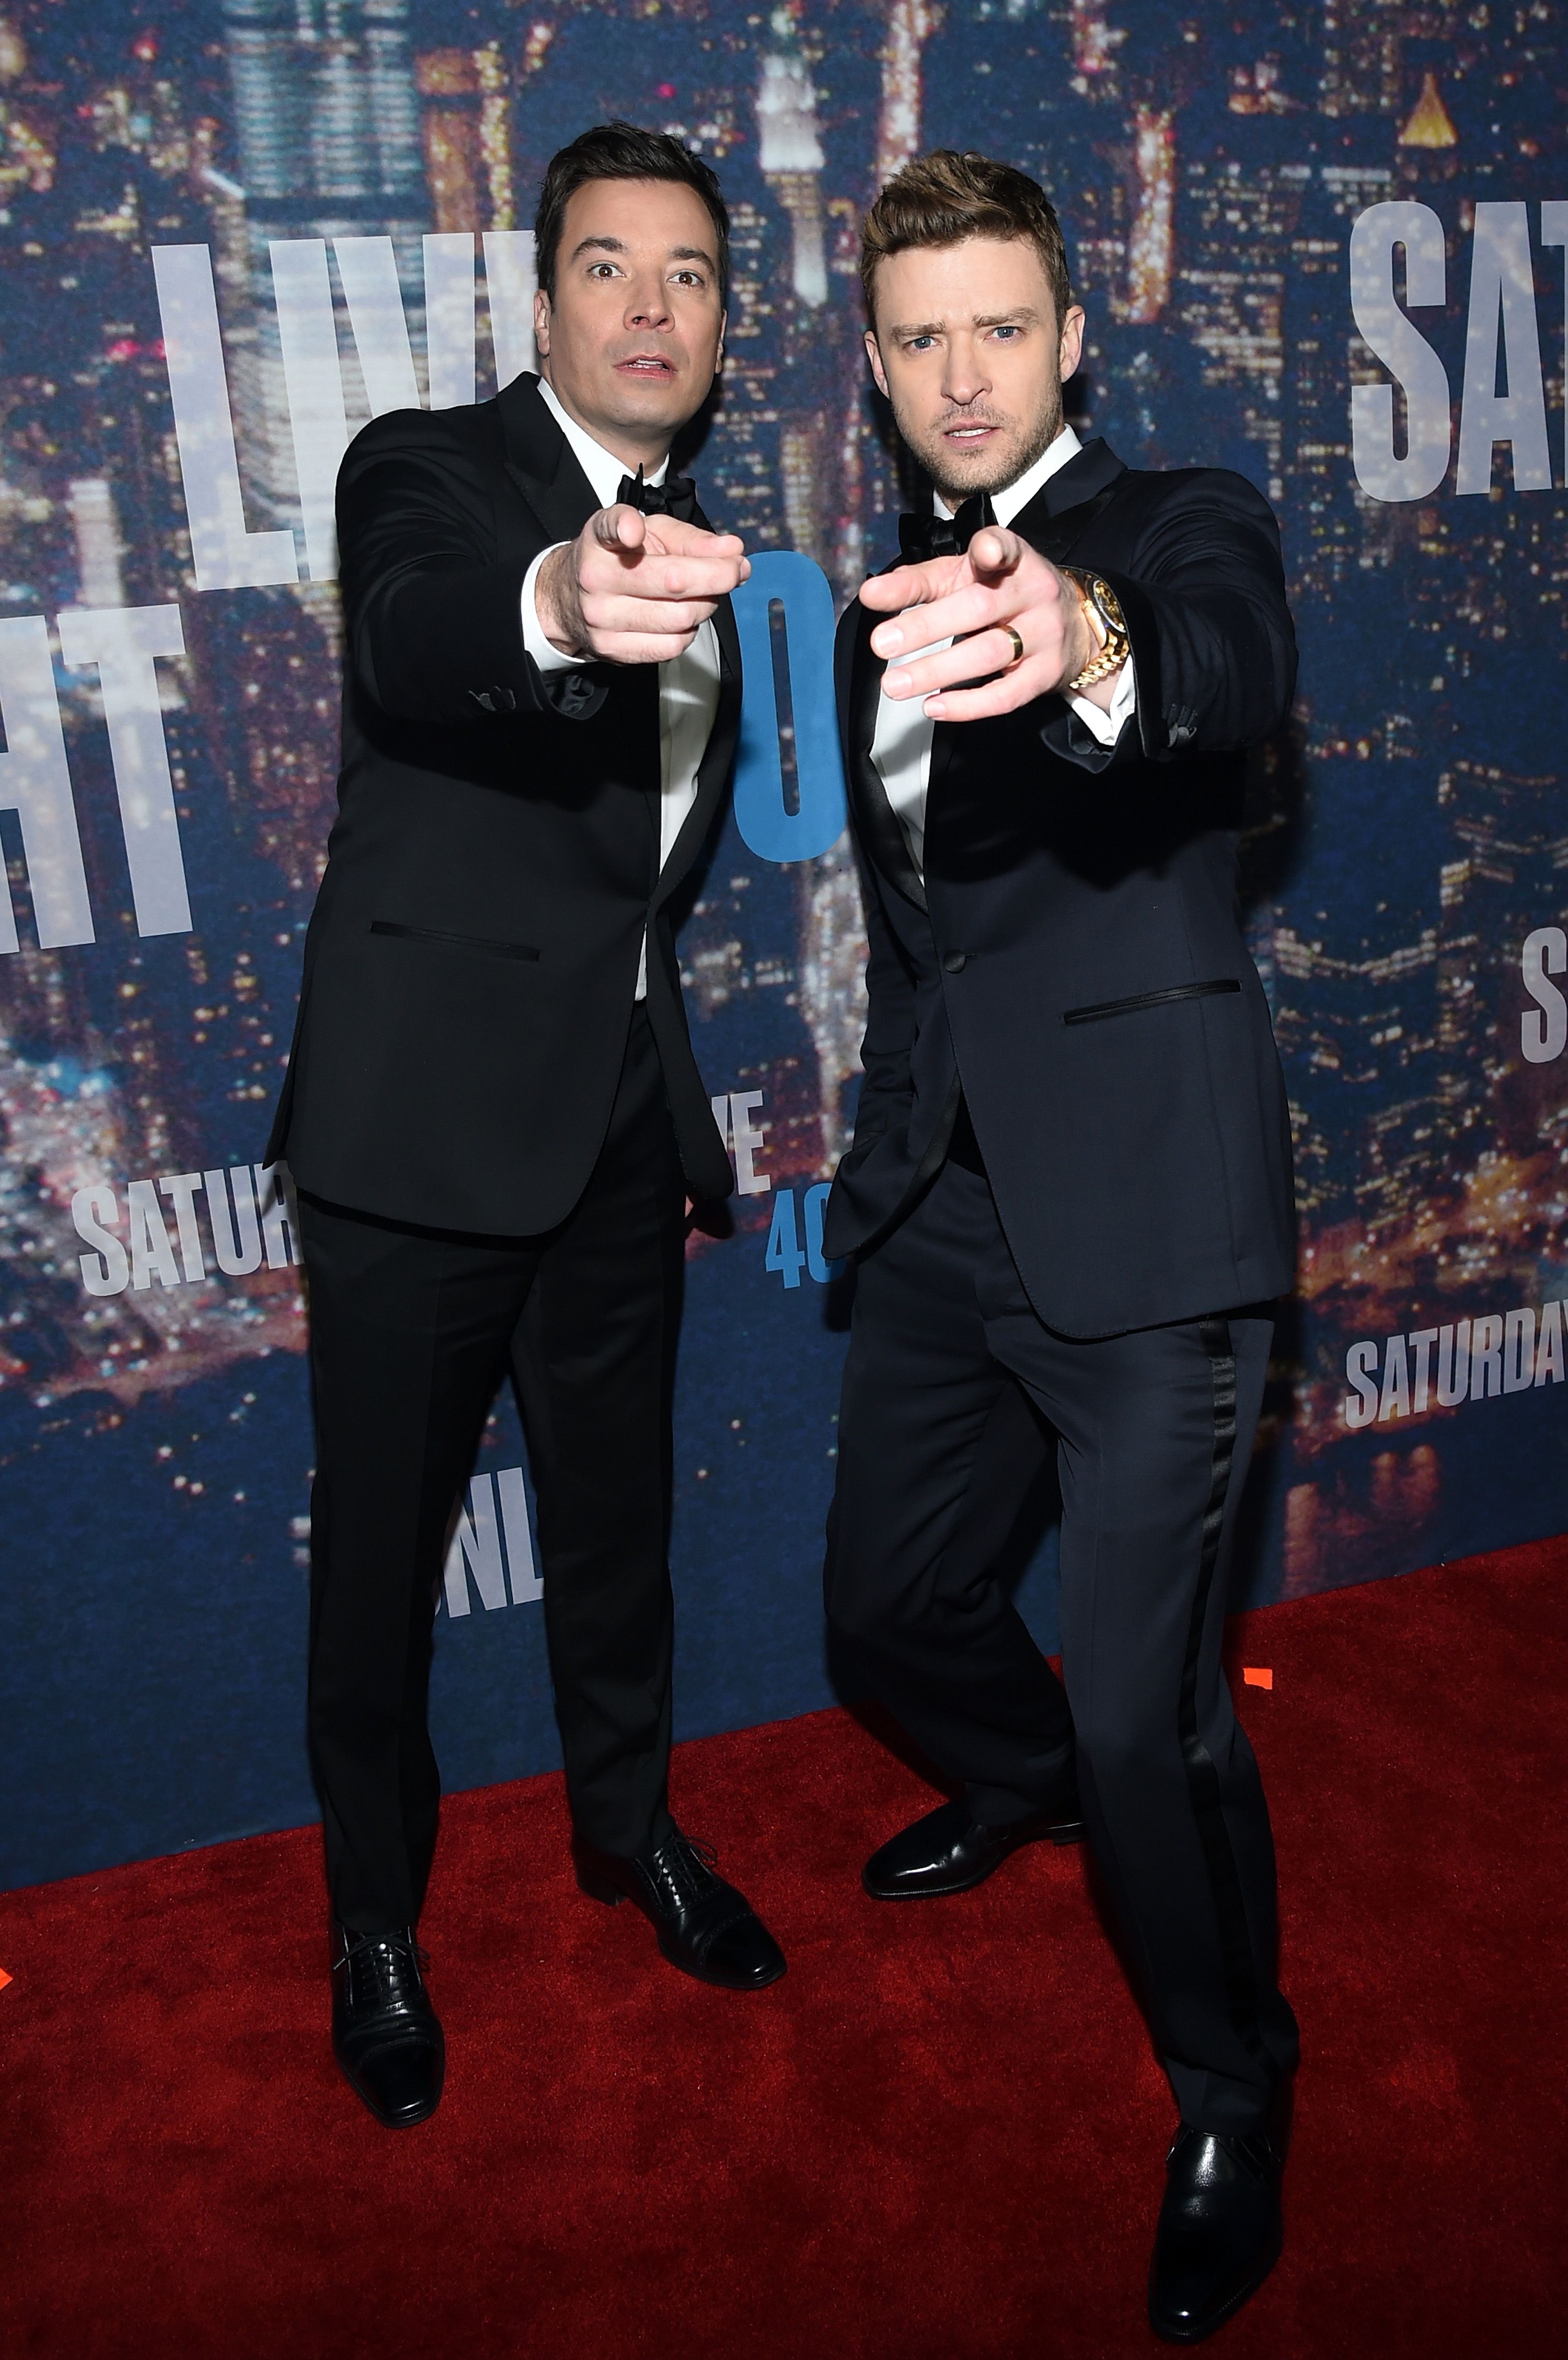 Jimmy Fallon and Justin Timberlake at the SNL 40th Anniversary Celebration in 2015 | Photo: Getty Images